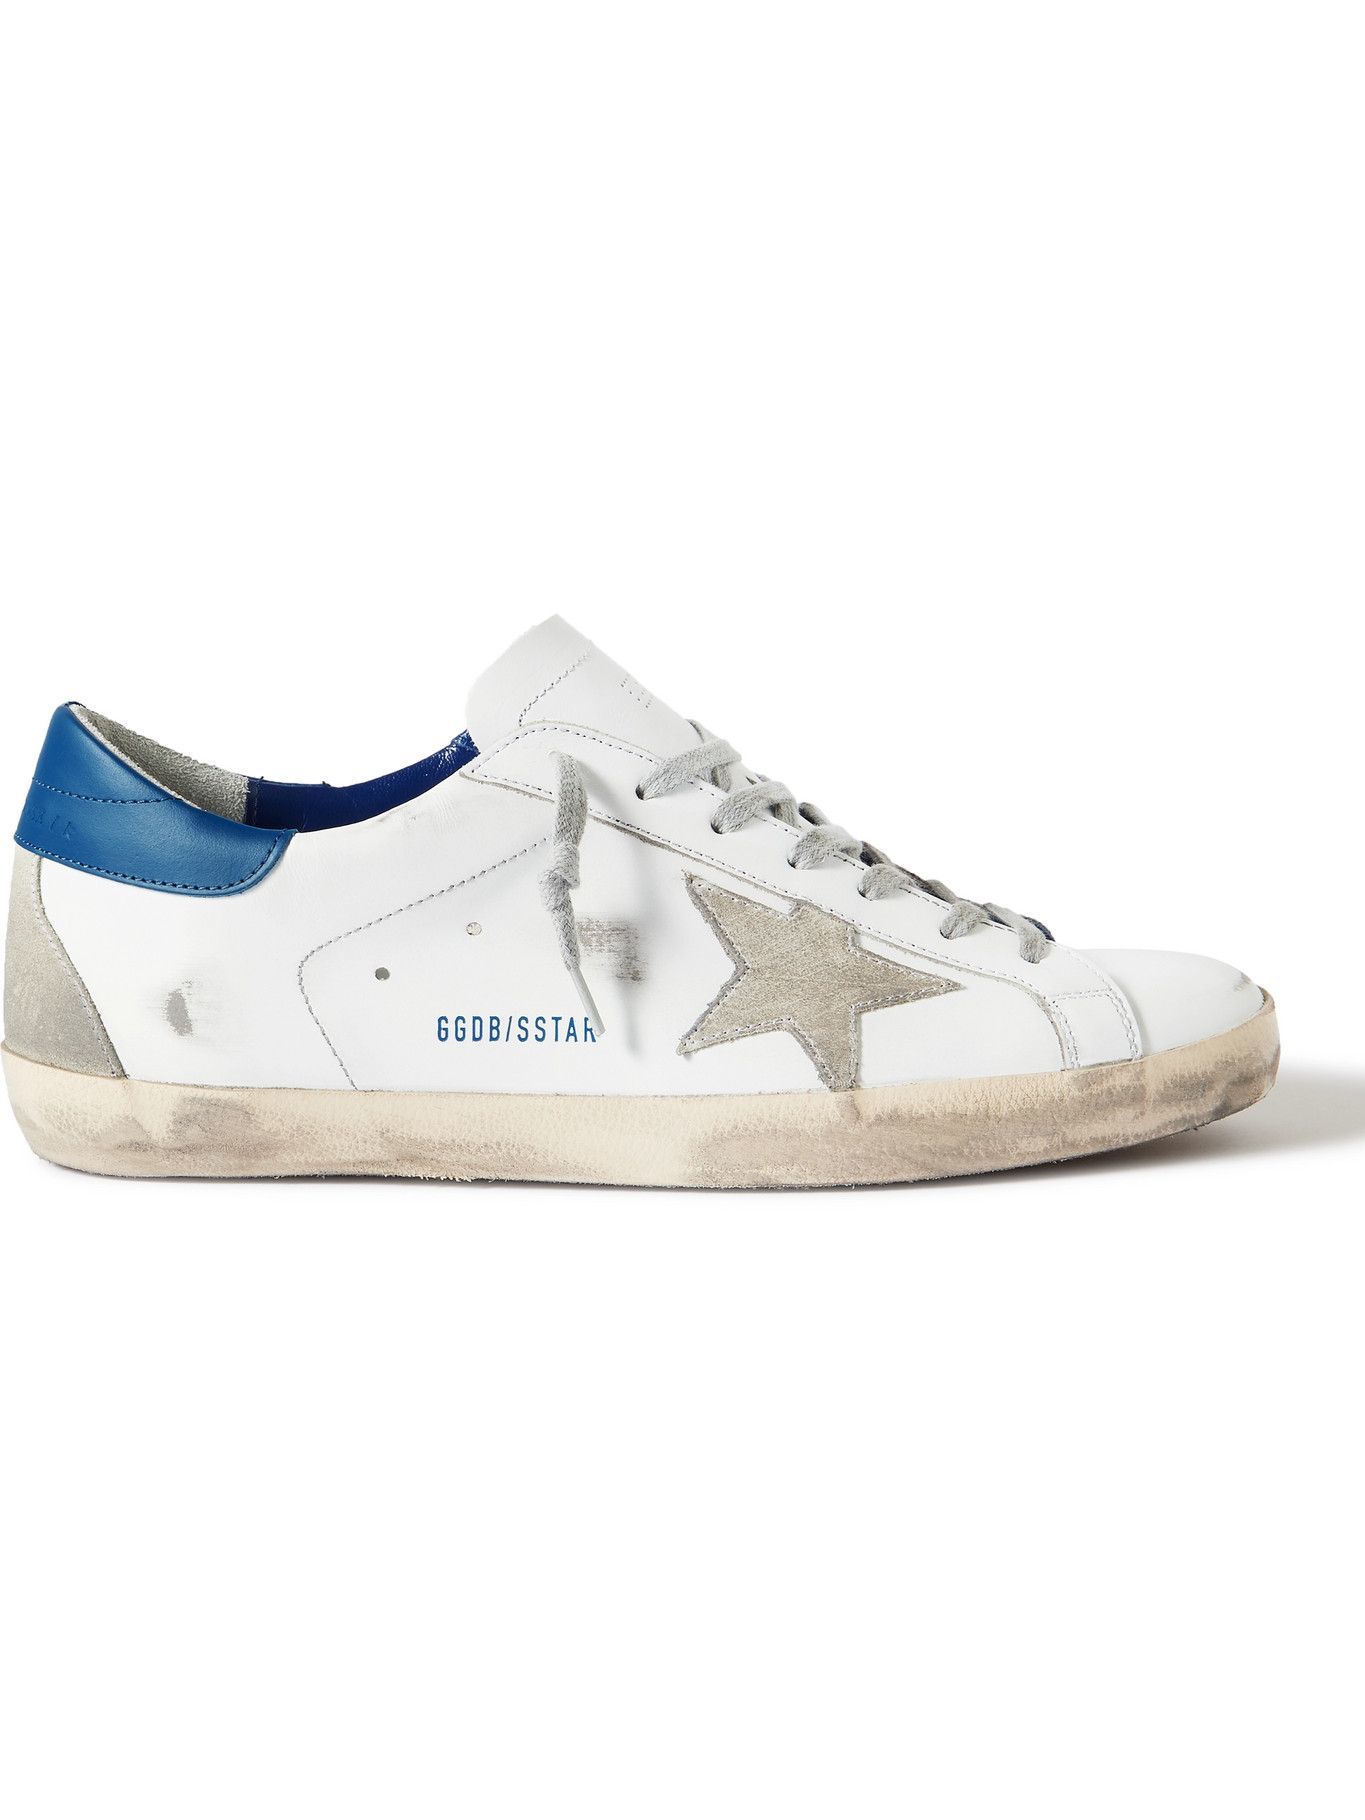 Golden Goose - Superstar Distressed Leather and Suede Sneakers - White ...